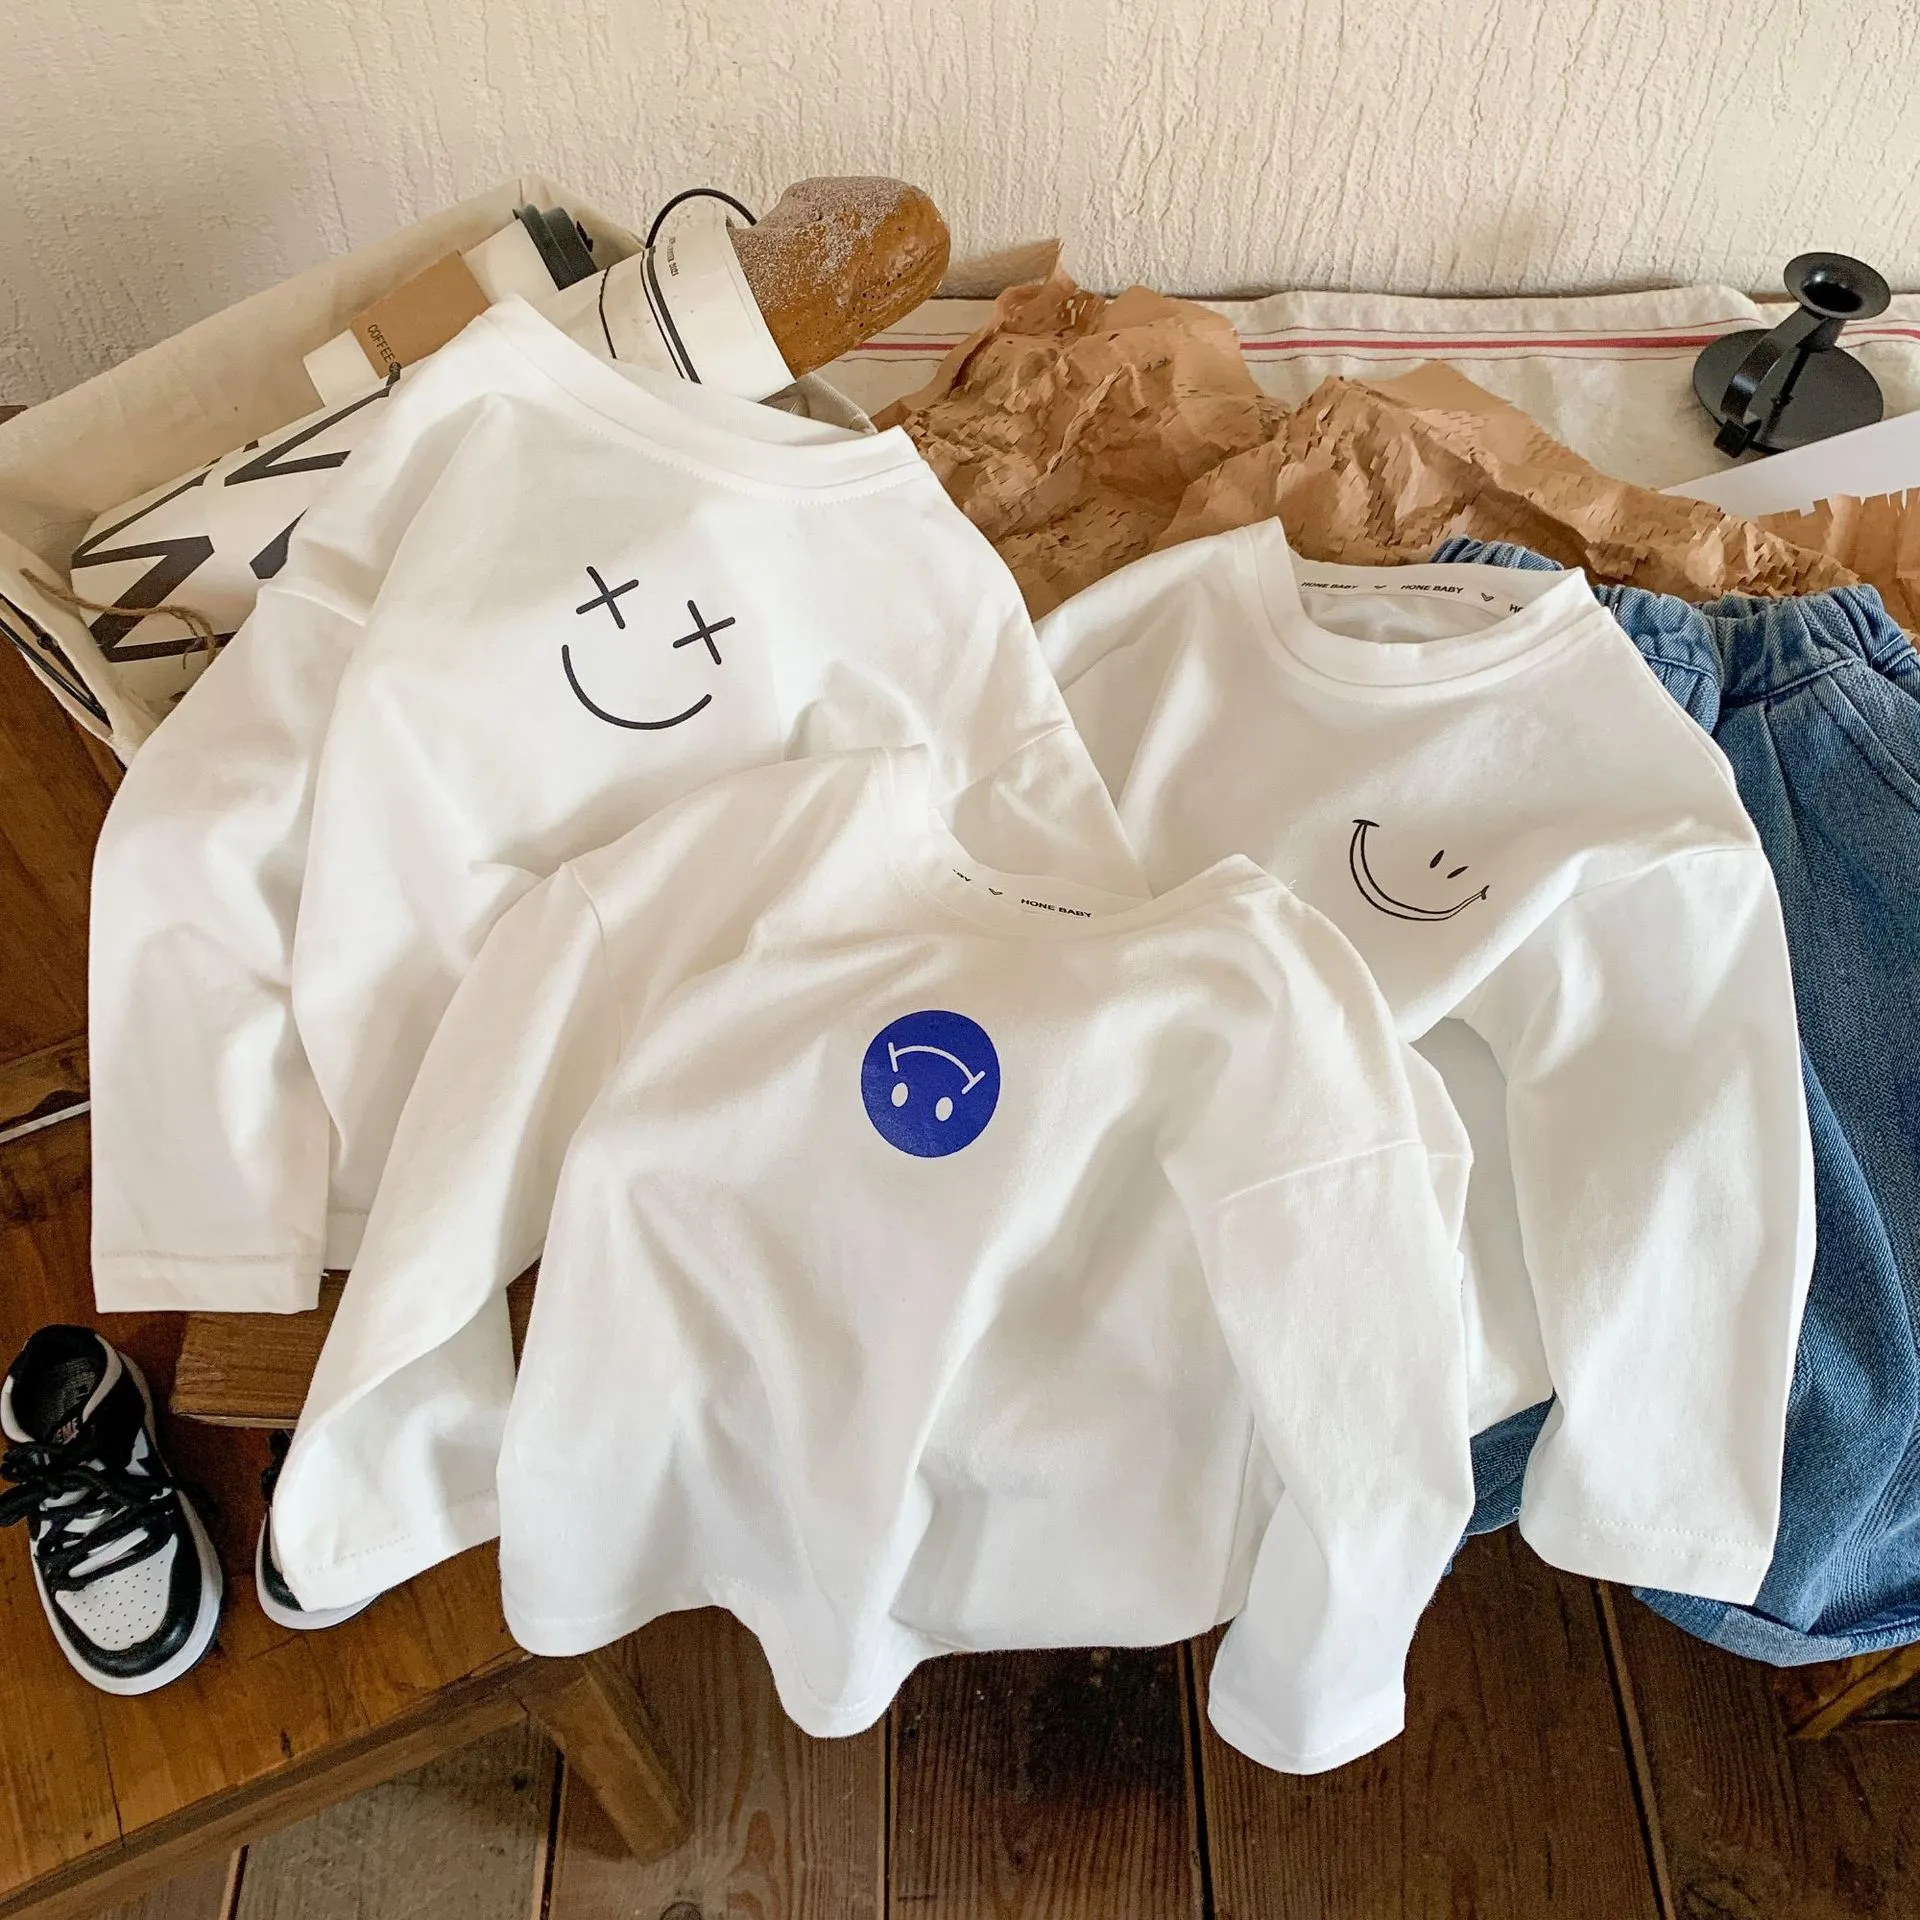 Children's Cotton Long Sleeve T-shirt Baby Spring Top Boys and Girls Smiling Face Base Shirt